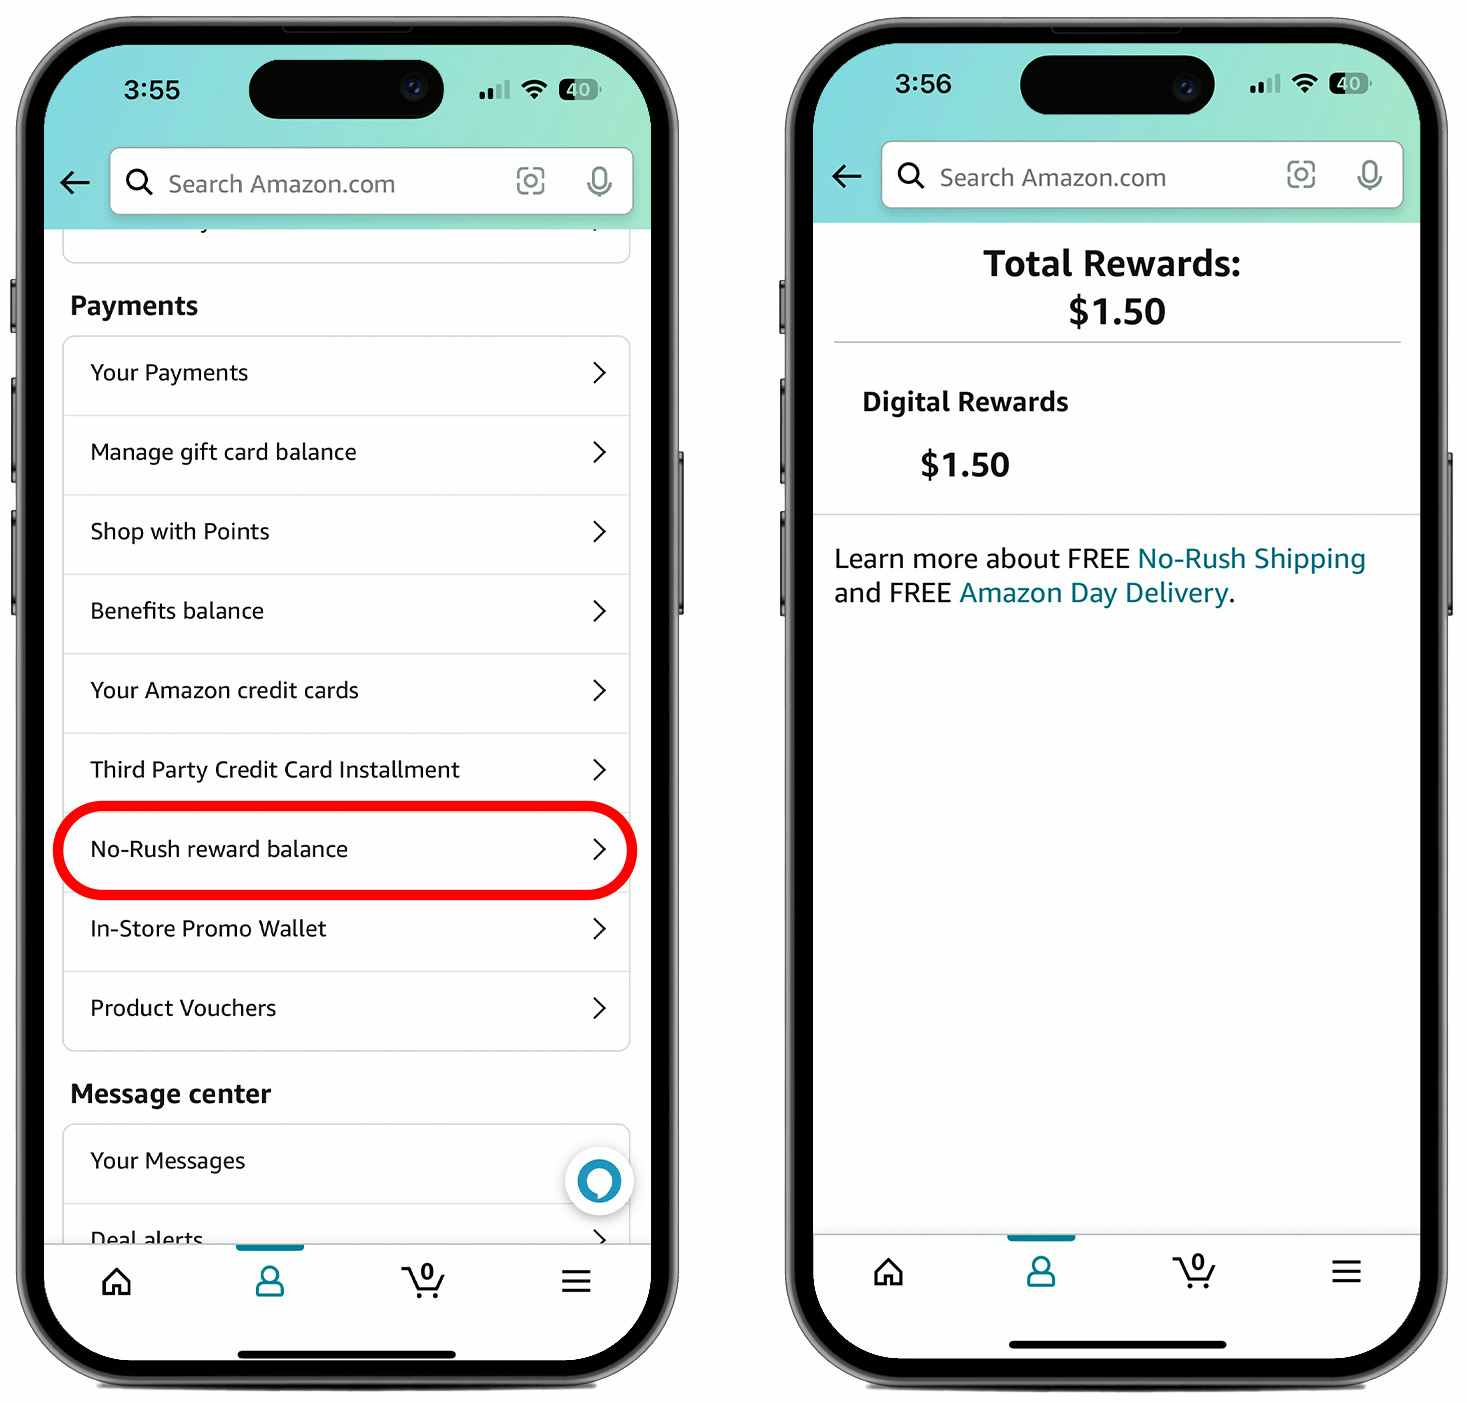 Two phones, one showing the list of links on the account menu in the Amazon app with the "No-rush reward balance" choice circled in red, and the other phone showing the Digital Rewards balance of the user